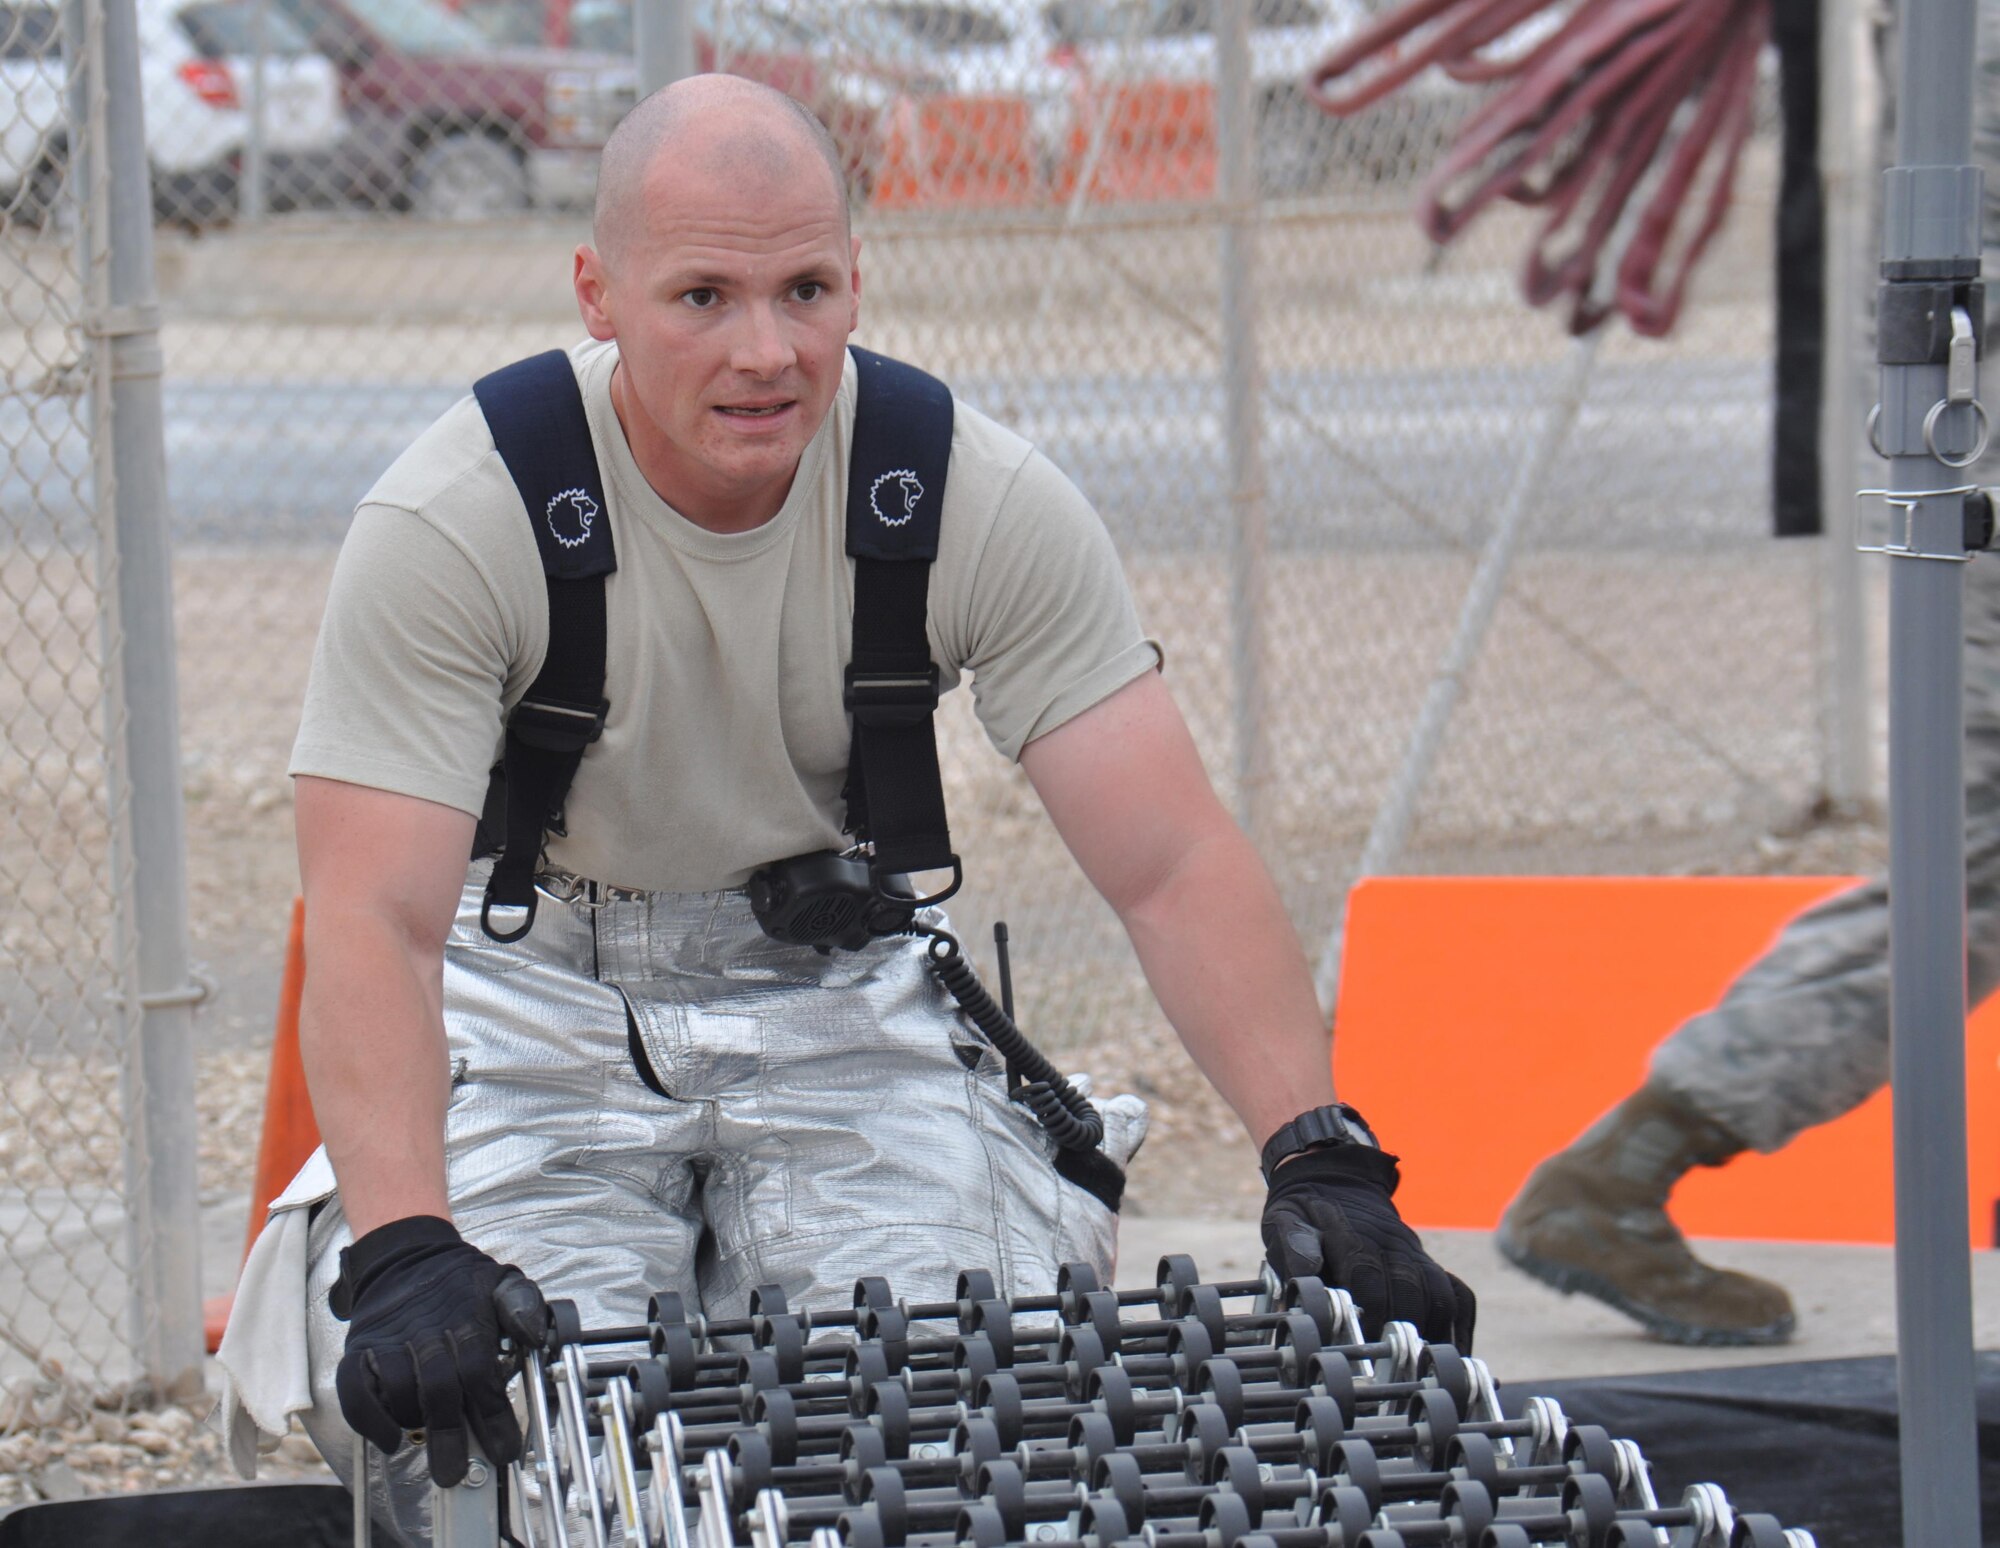 Senior Airman Matthew Petersen, 379th Expeditionary Civil Engineer Squadron firefighter, sets up a conveyer belt inside a decontamination processing area during a hazardous materials exercise at Al Udeid Air Base, Qatar March 16. The training exercise, which featured mock explosives and chemicals, provided first responders an opportunity to practice reacting to an emergency incident. Several emergency personnel participated in the exercise including security forces and medics. (U.S. Air Force photo by Tech. Sgt. James Hodgman/Released)